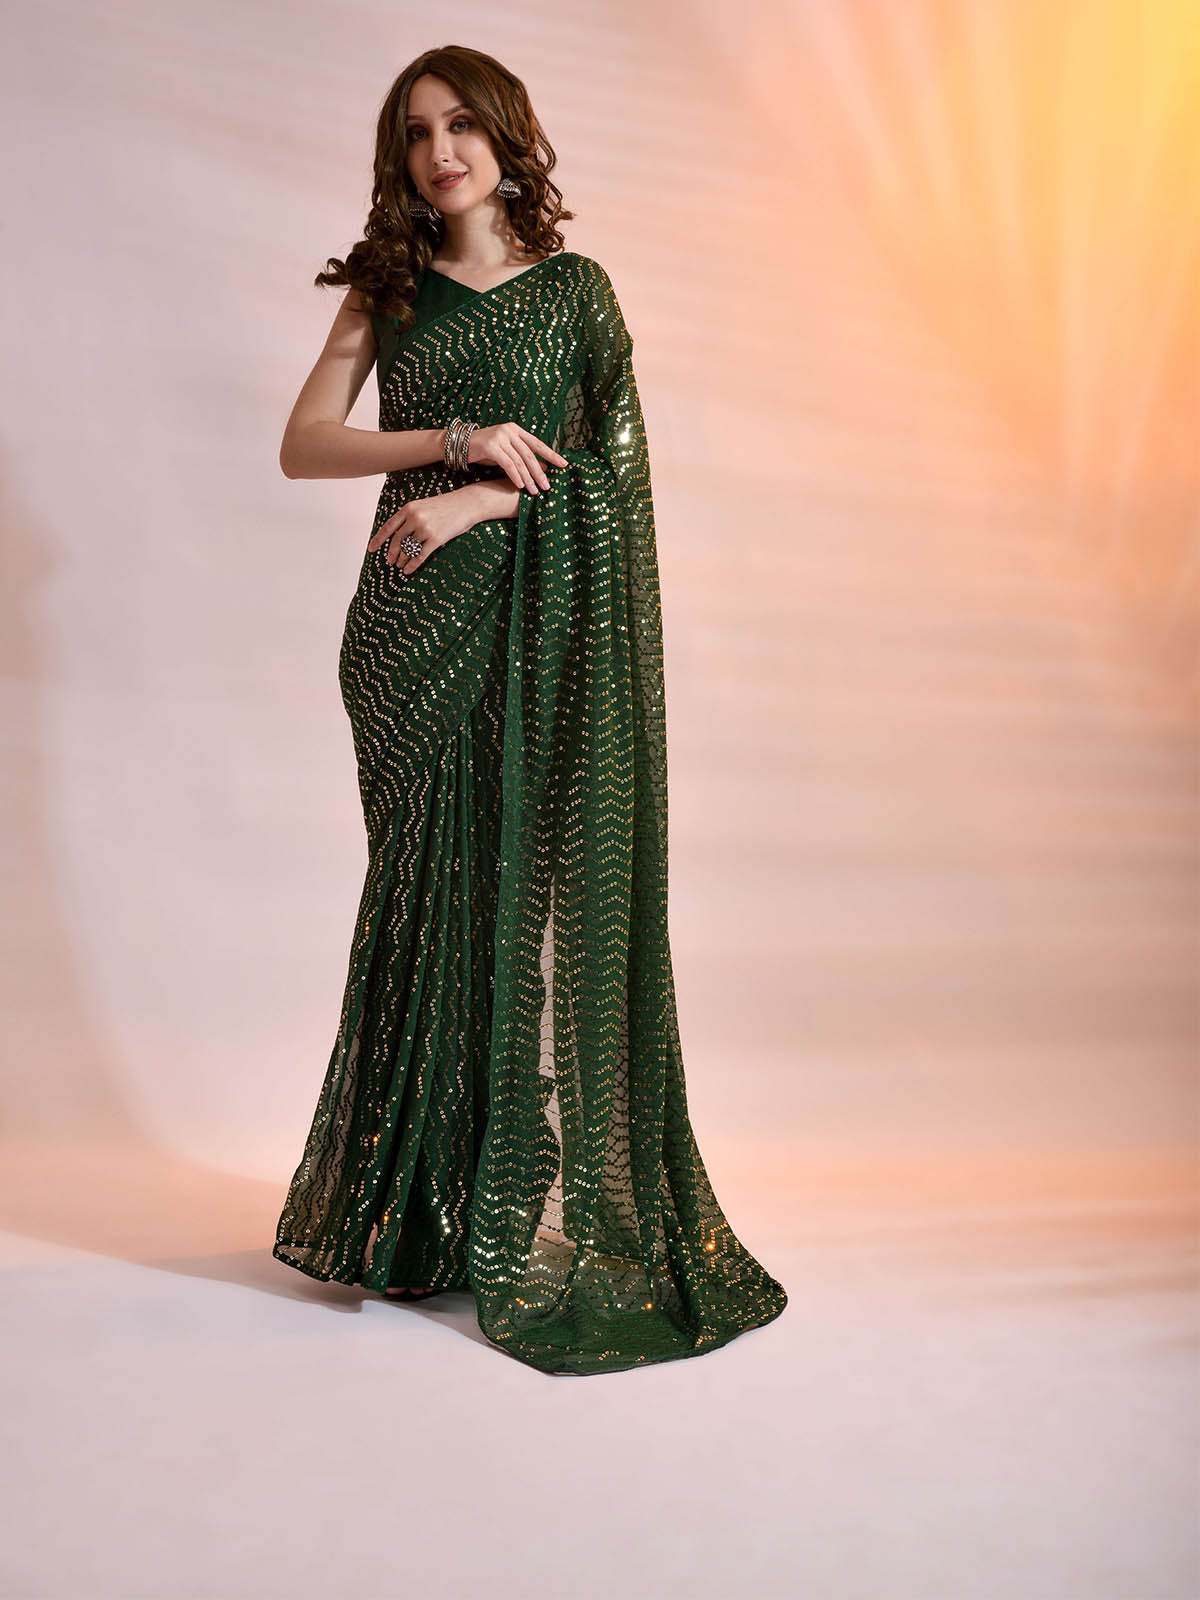 Women's Green Georgette Saree With Blouse - Odette